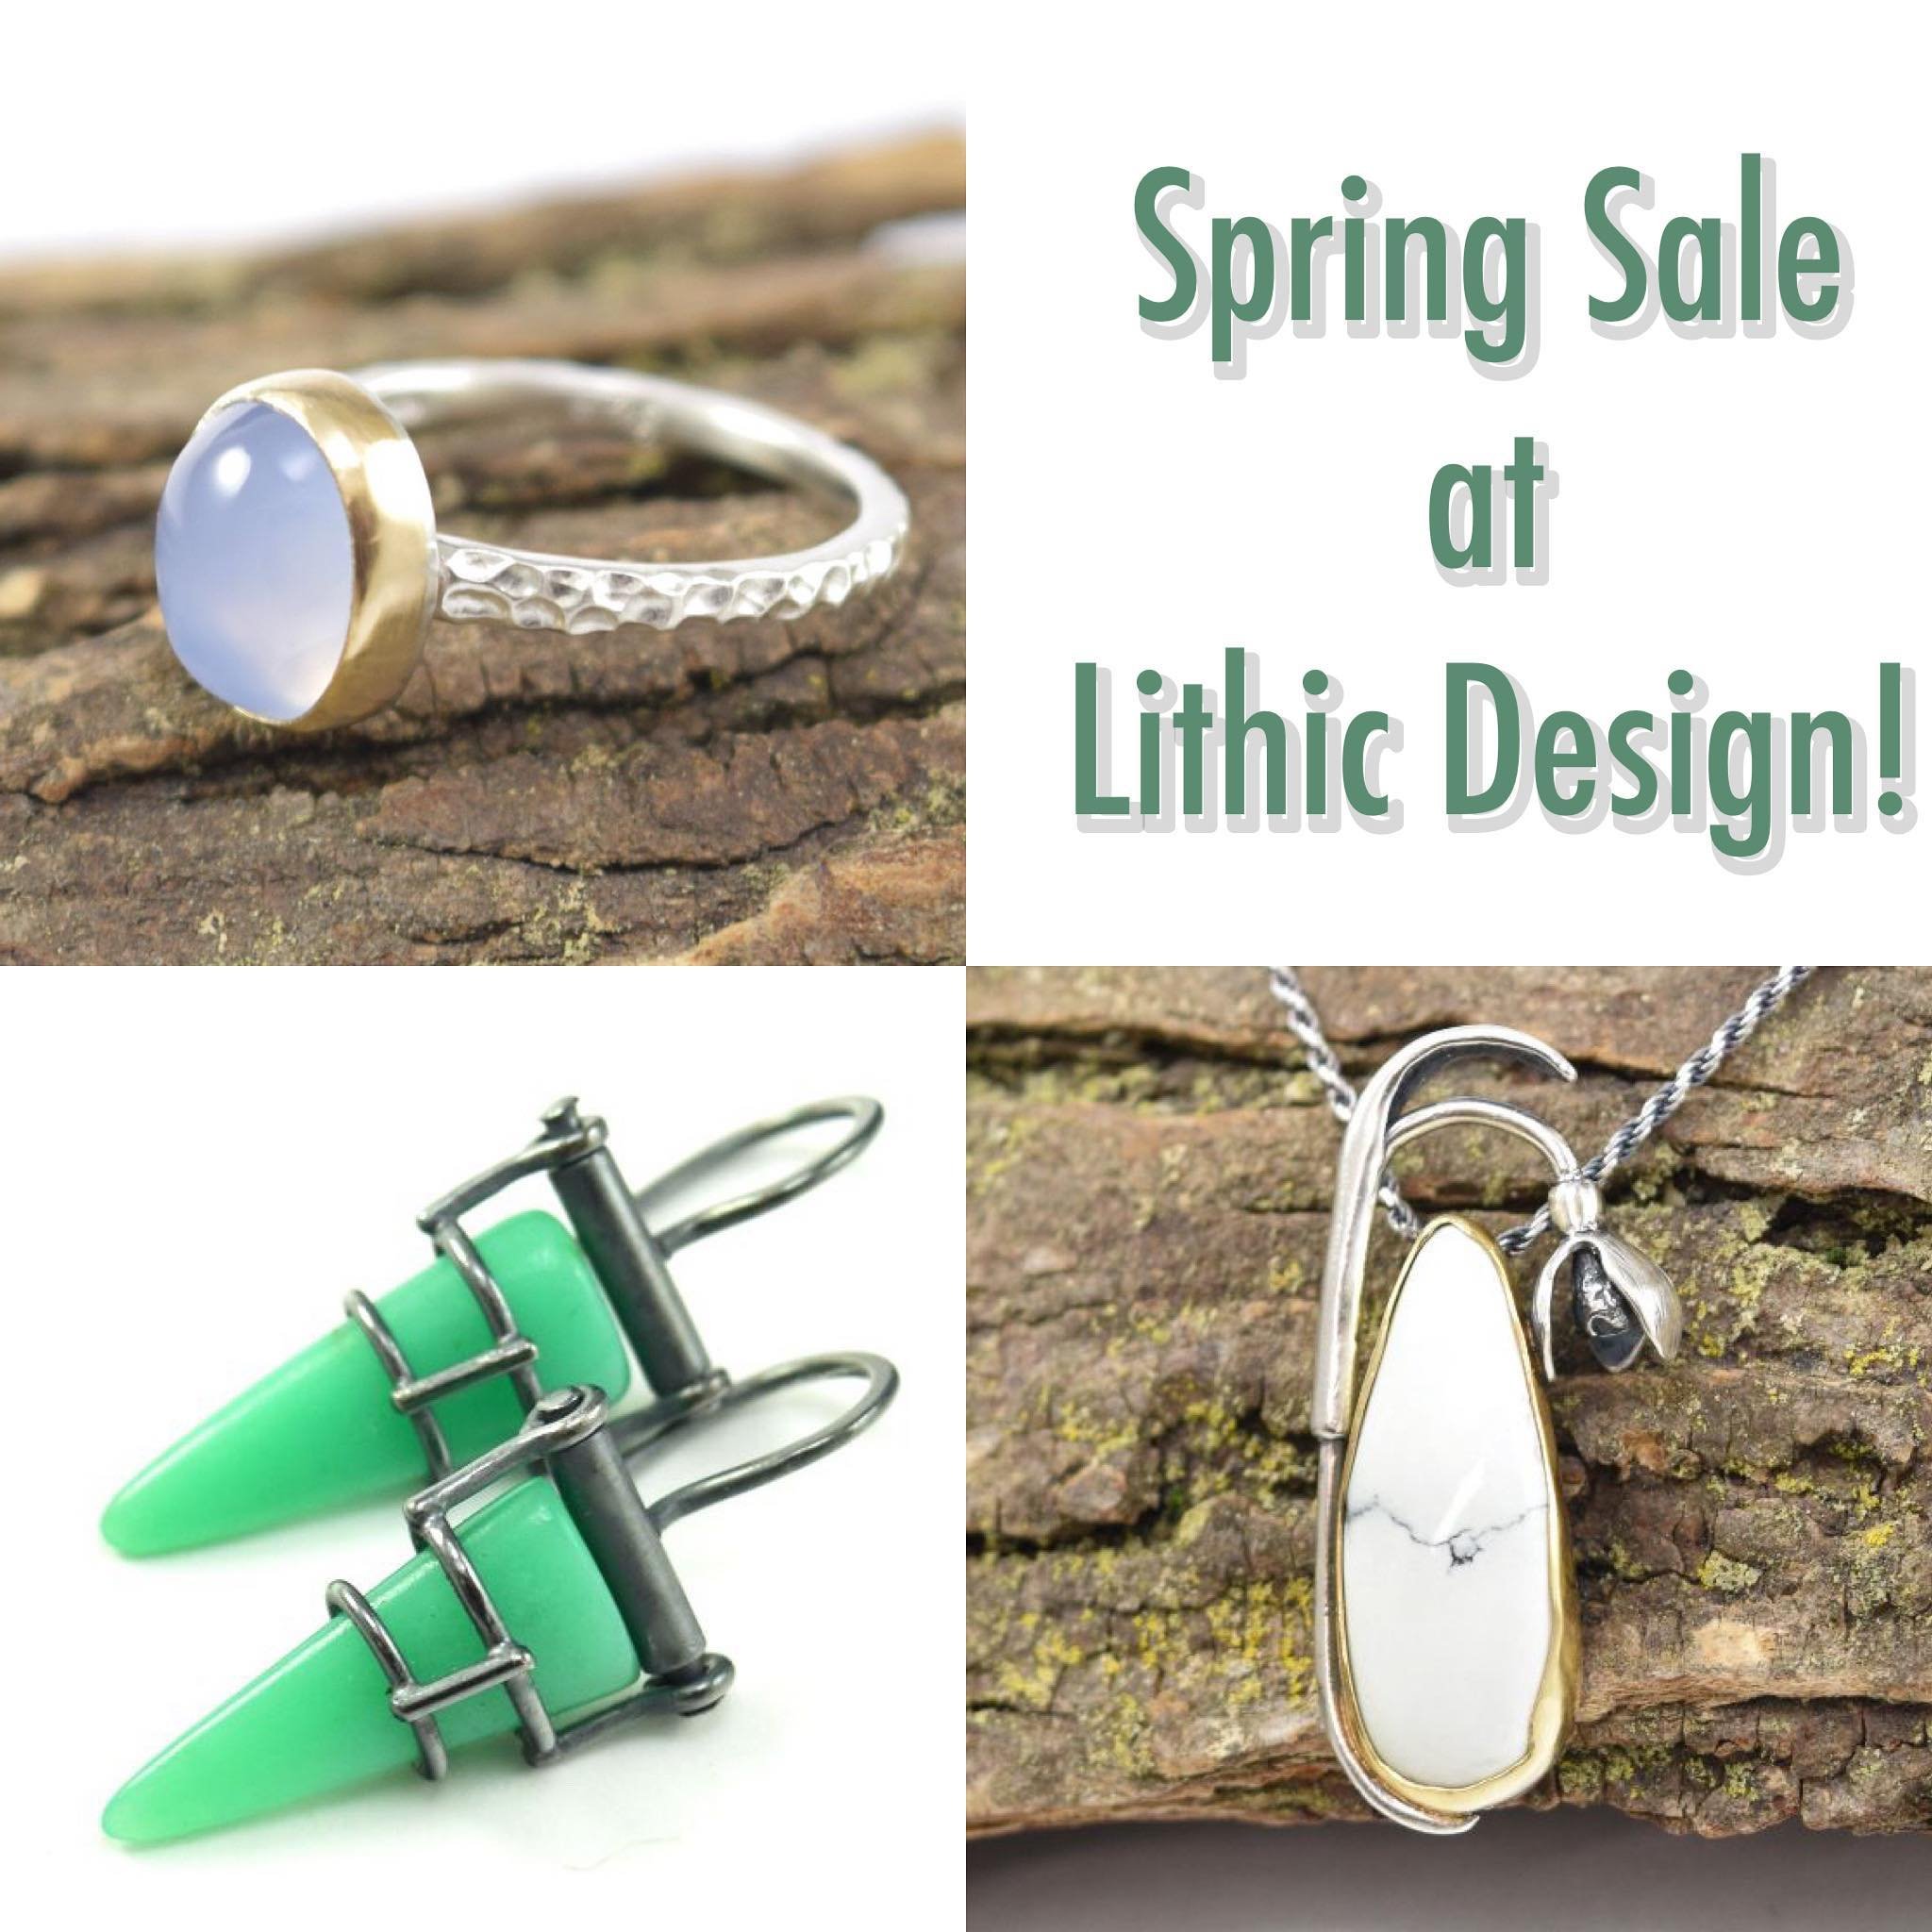 Save 15% off Now through May 12 on All Orders at lithicdesign.com